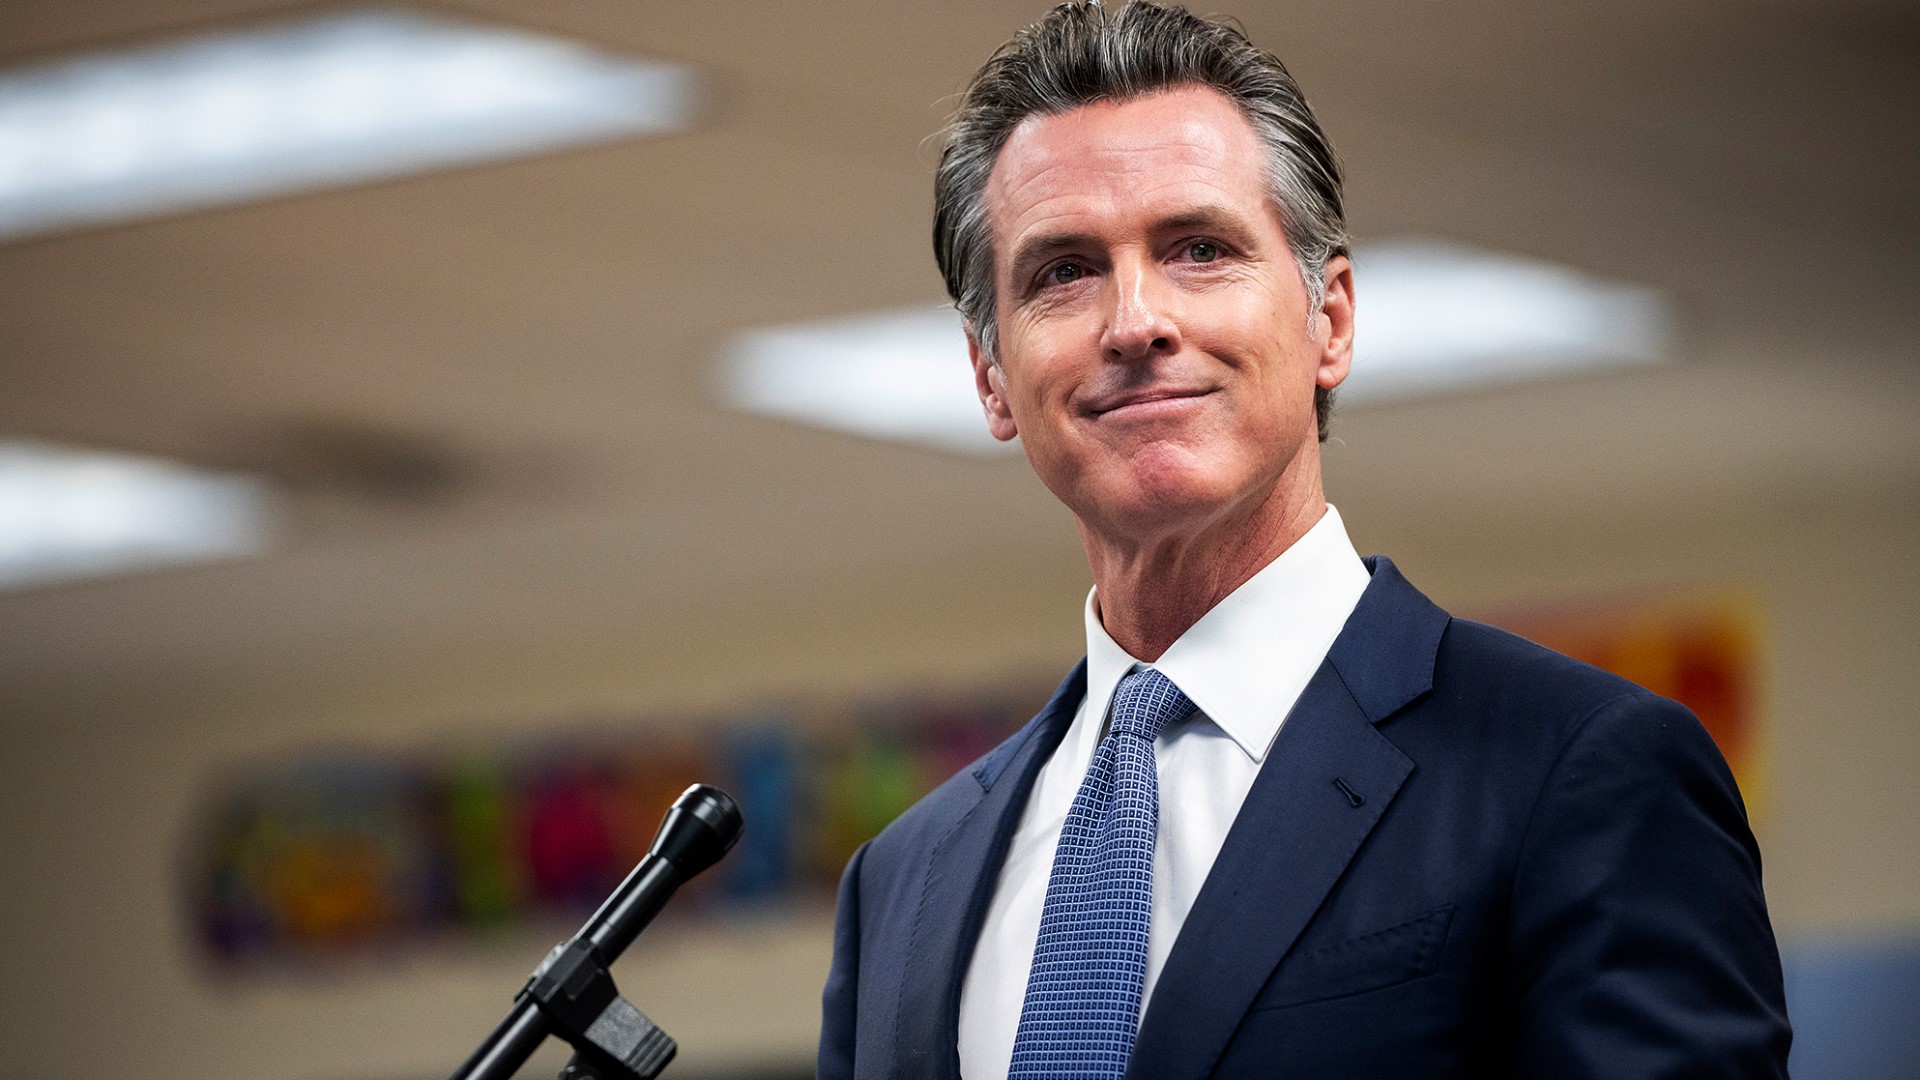 California governor pushes for gun laws modeled on Texas abortion ban.